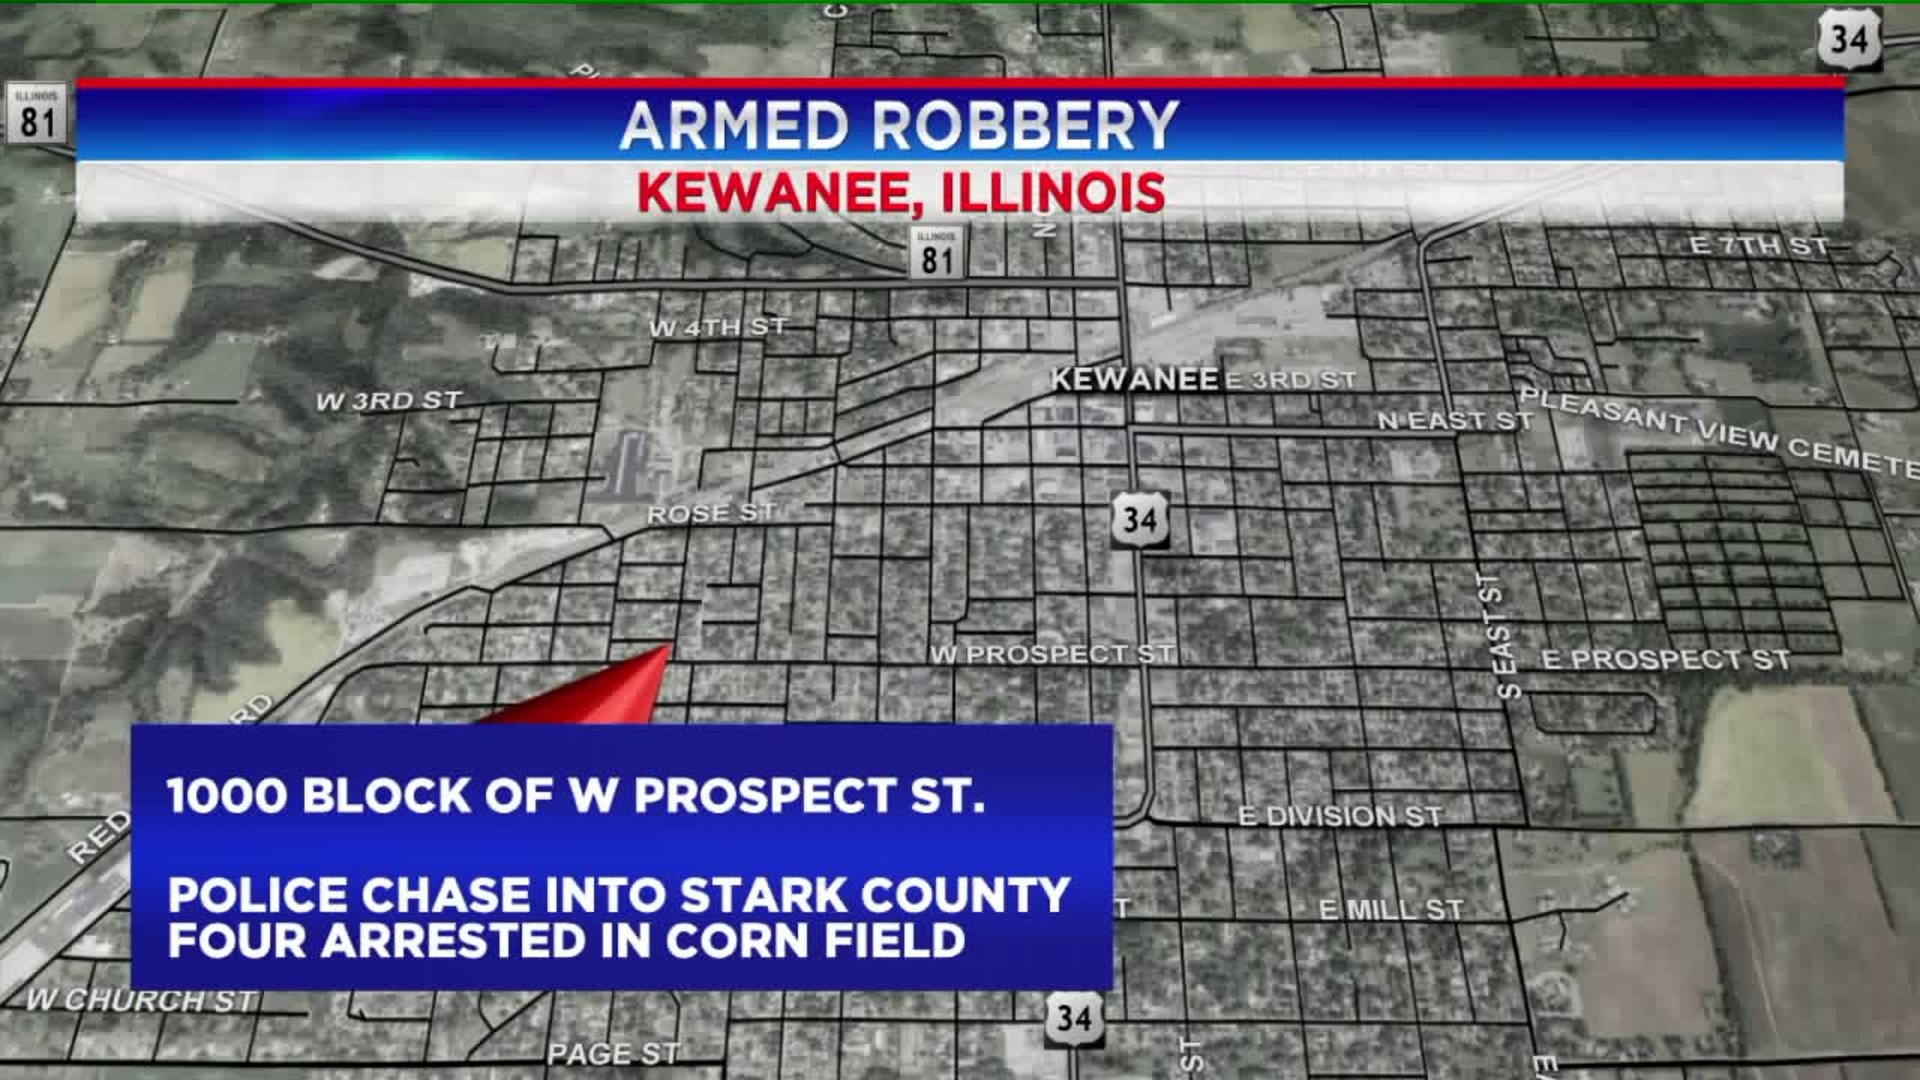 Kewanee Chase and Armed Robbery